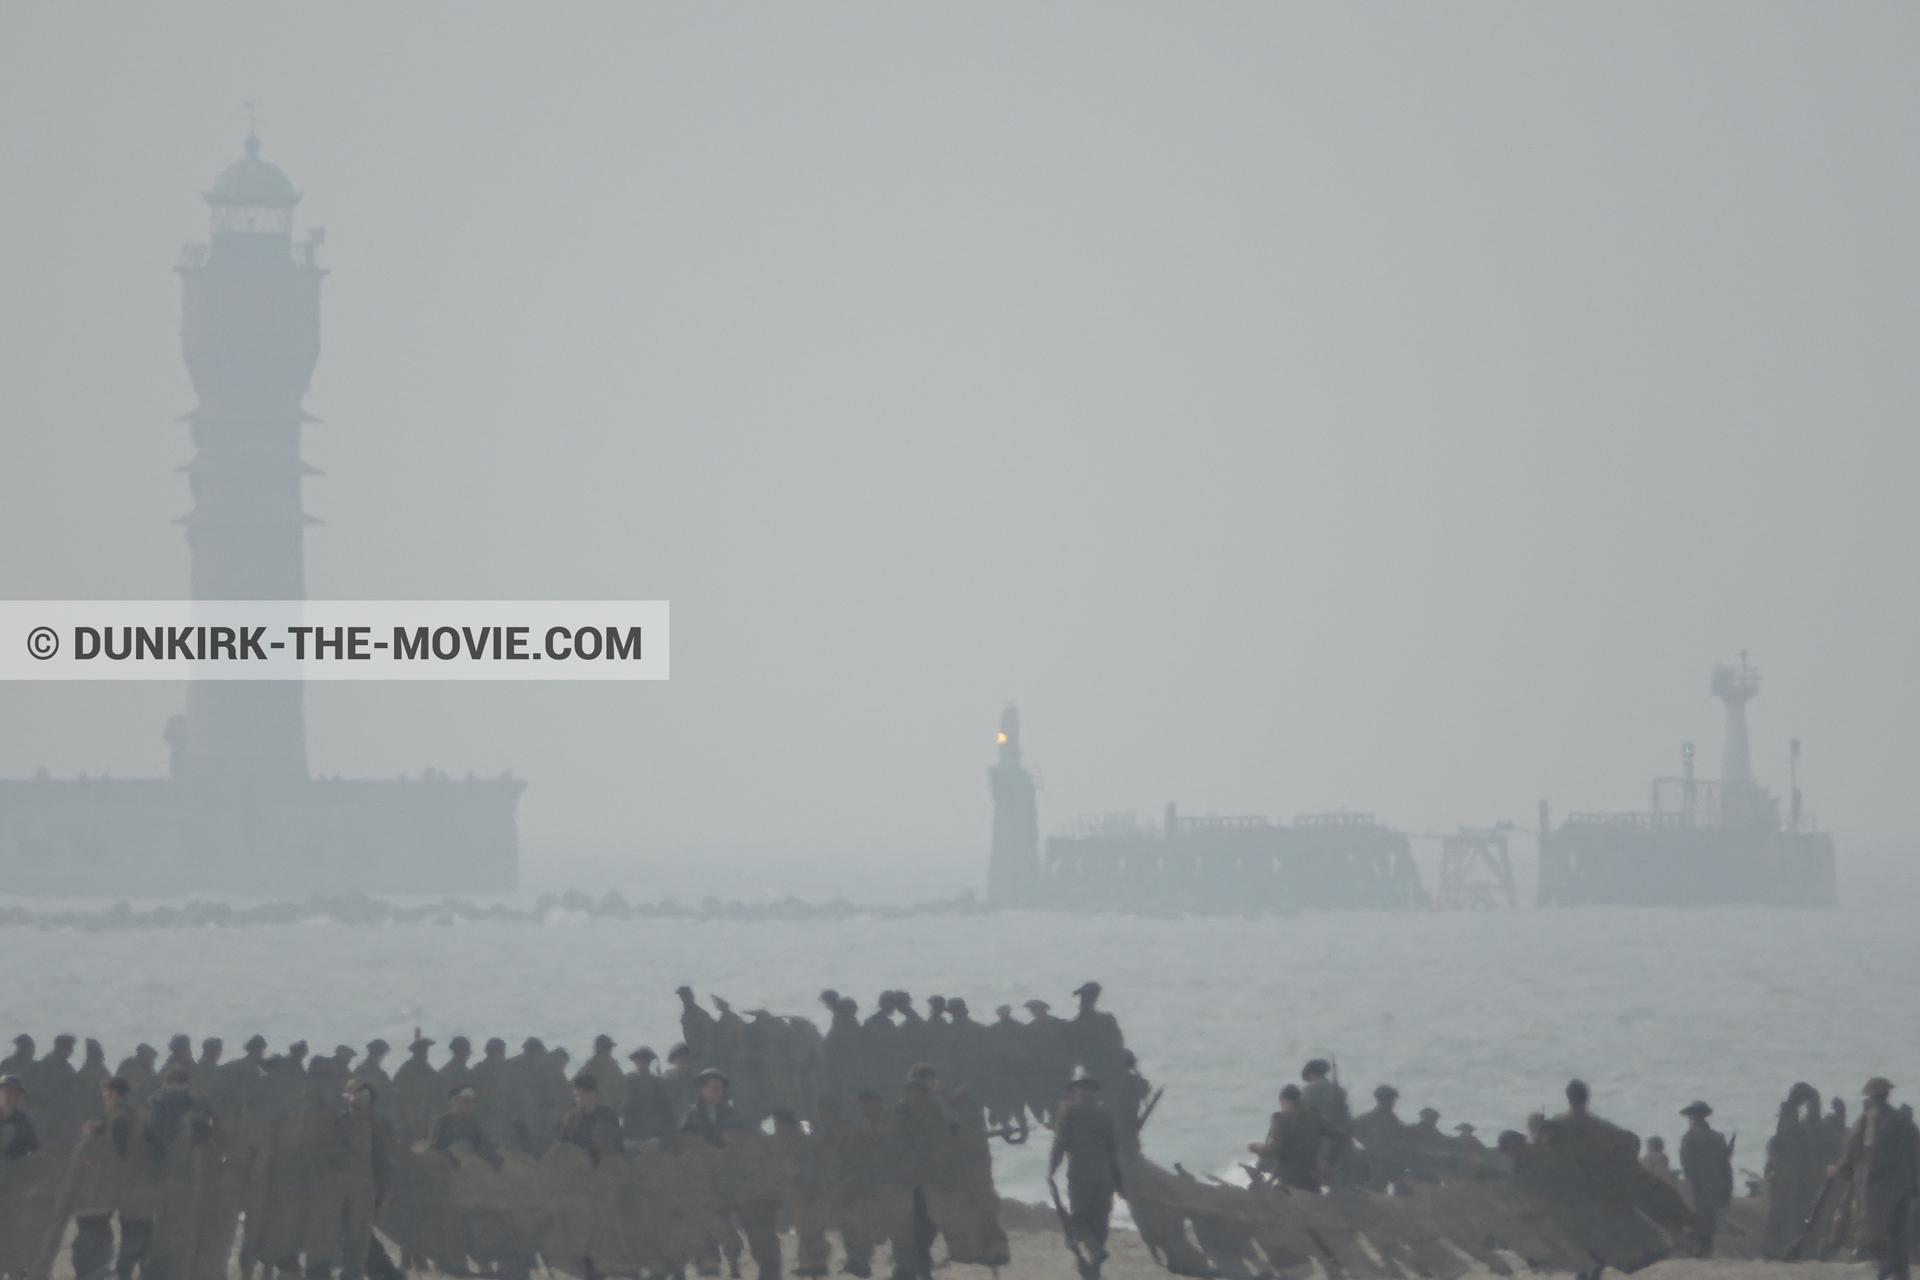 Picture with grey sky, supernumeraries, St Pol sur Mer lighthouse, beach,  from behind the scene of the Dunkirk movie by Nolan